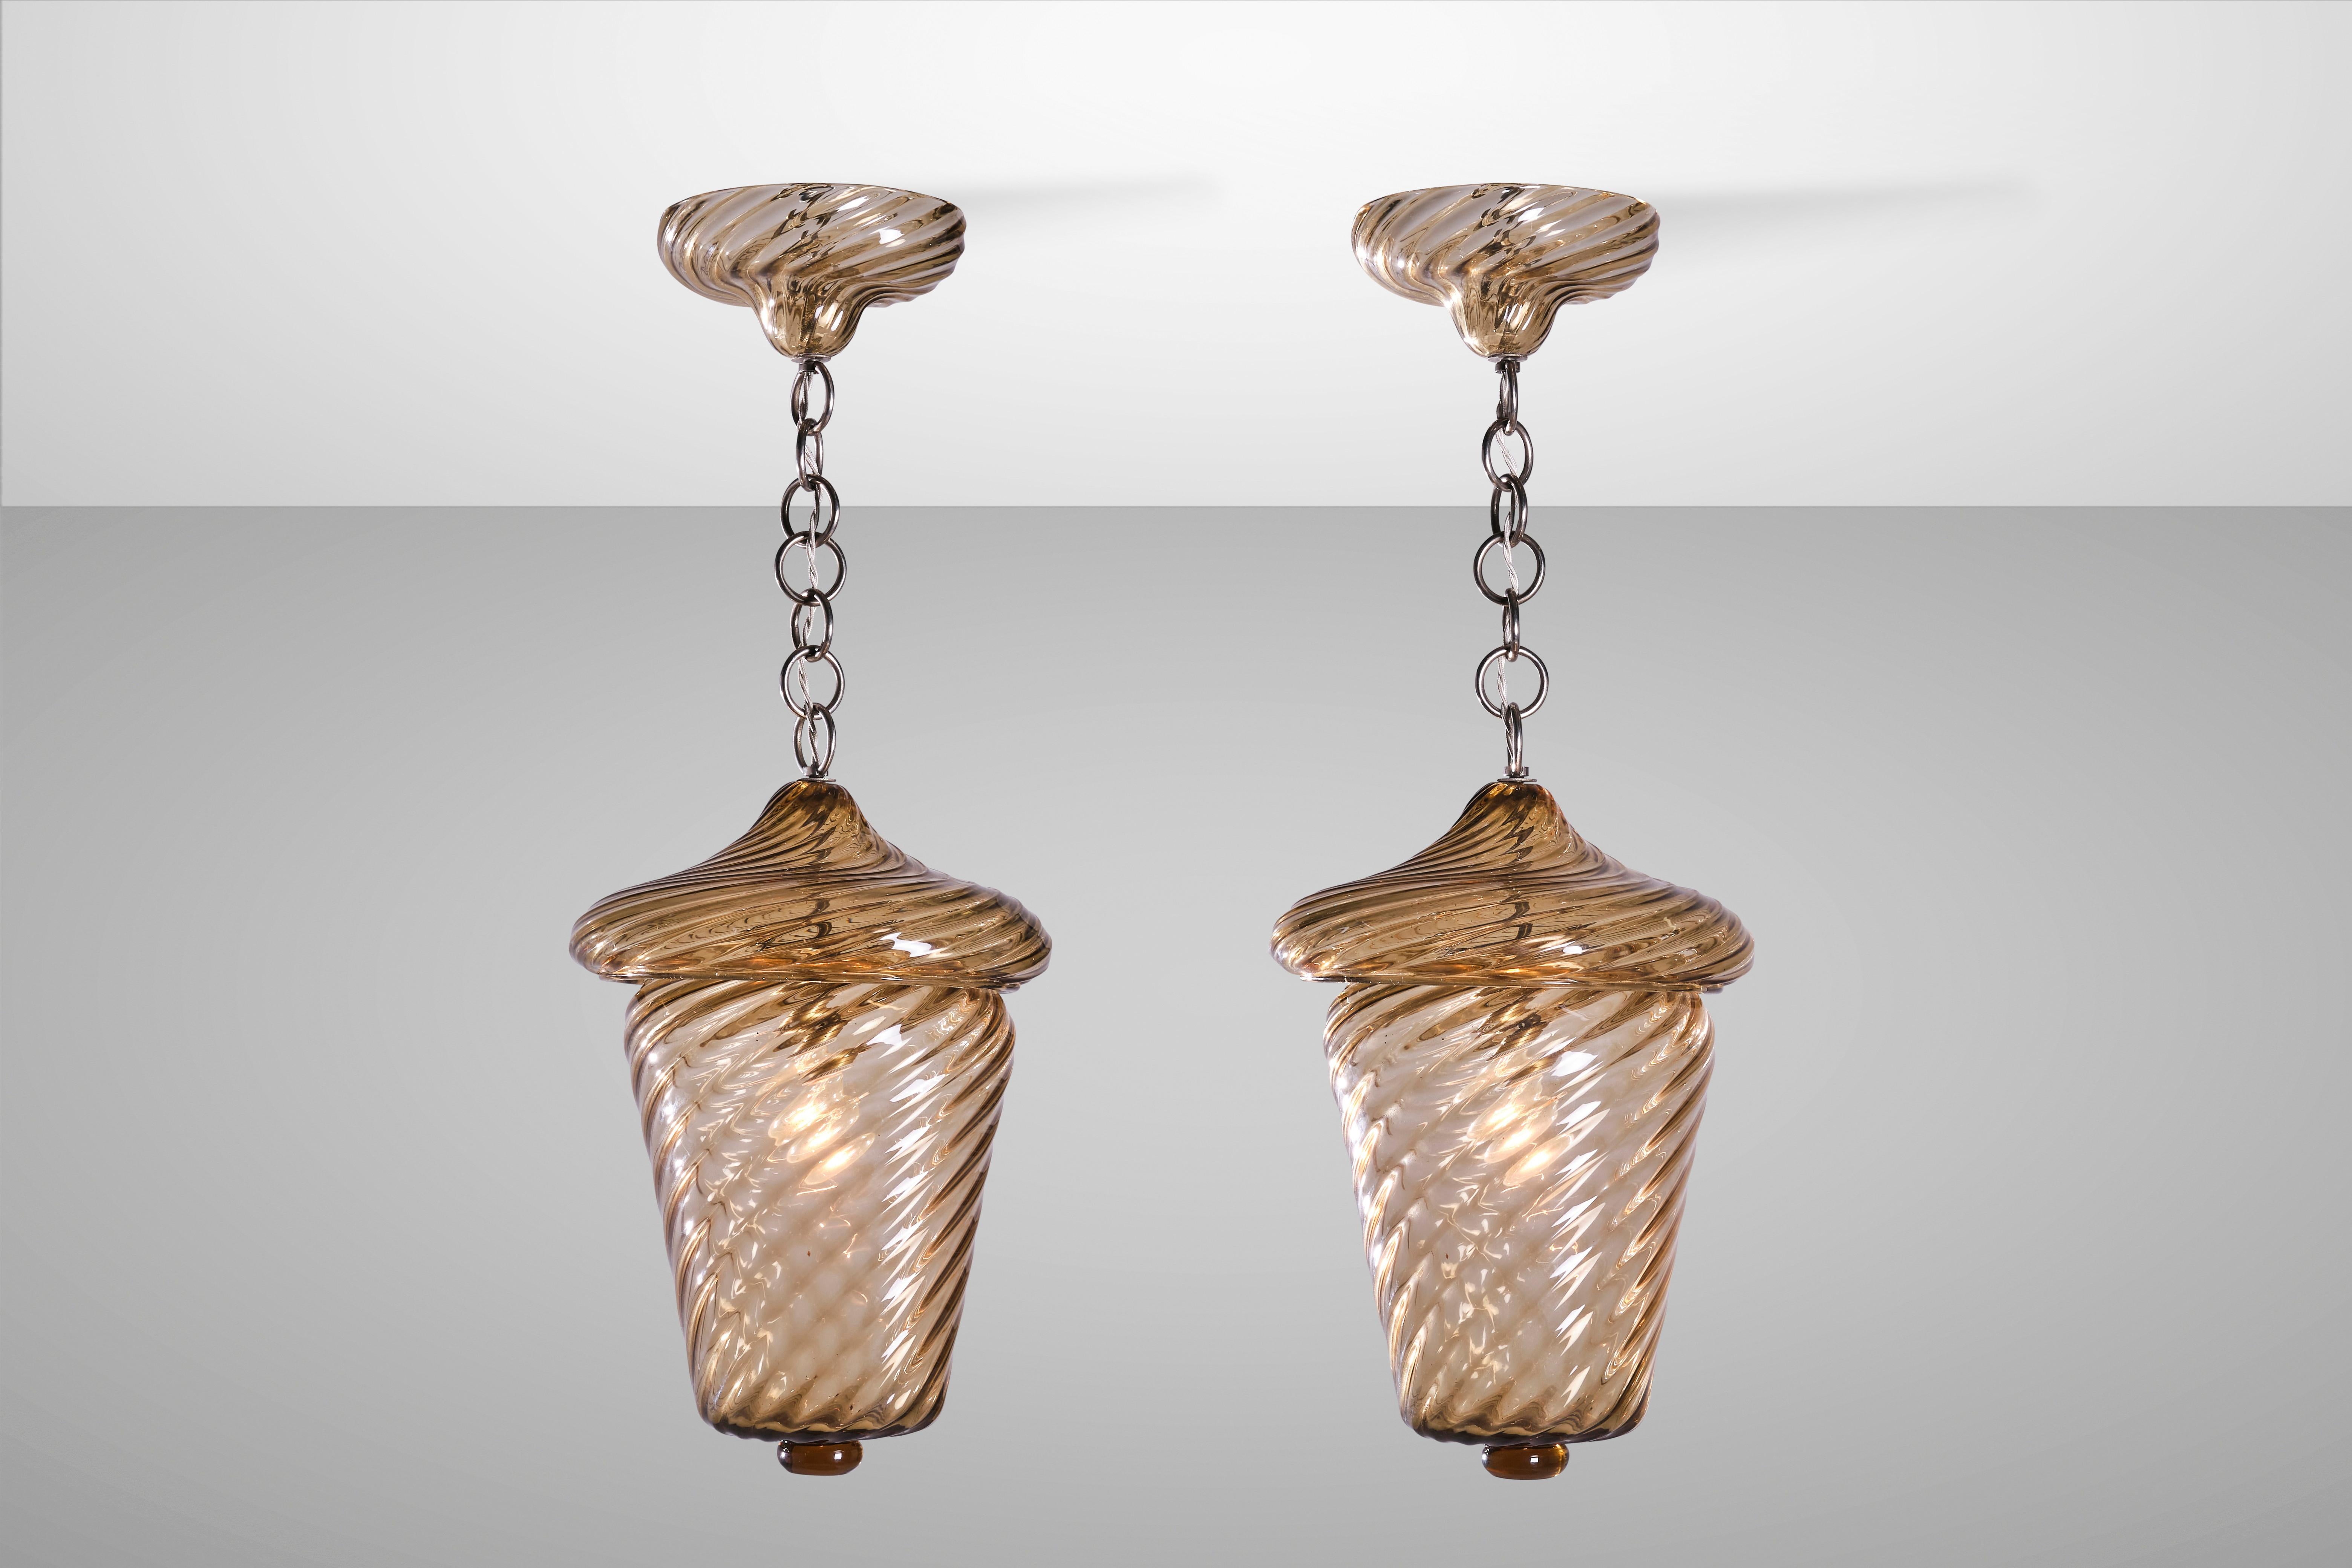 Lighting that manages to be both decorative and functional at the same time is one that becomes a classic over time. These amber-coloured lantern pendants made of twisted Rigadin (striped) blown glass are timelessly beautiful, bringing with them the